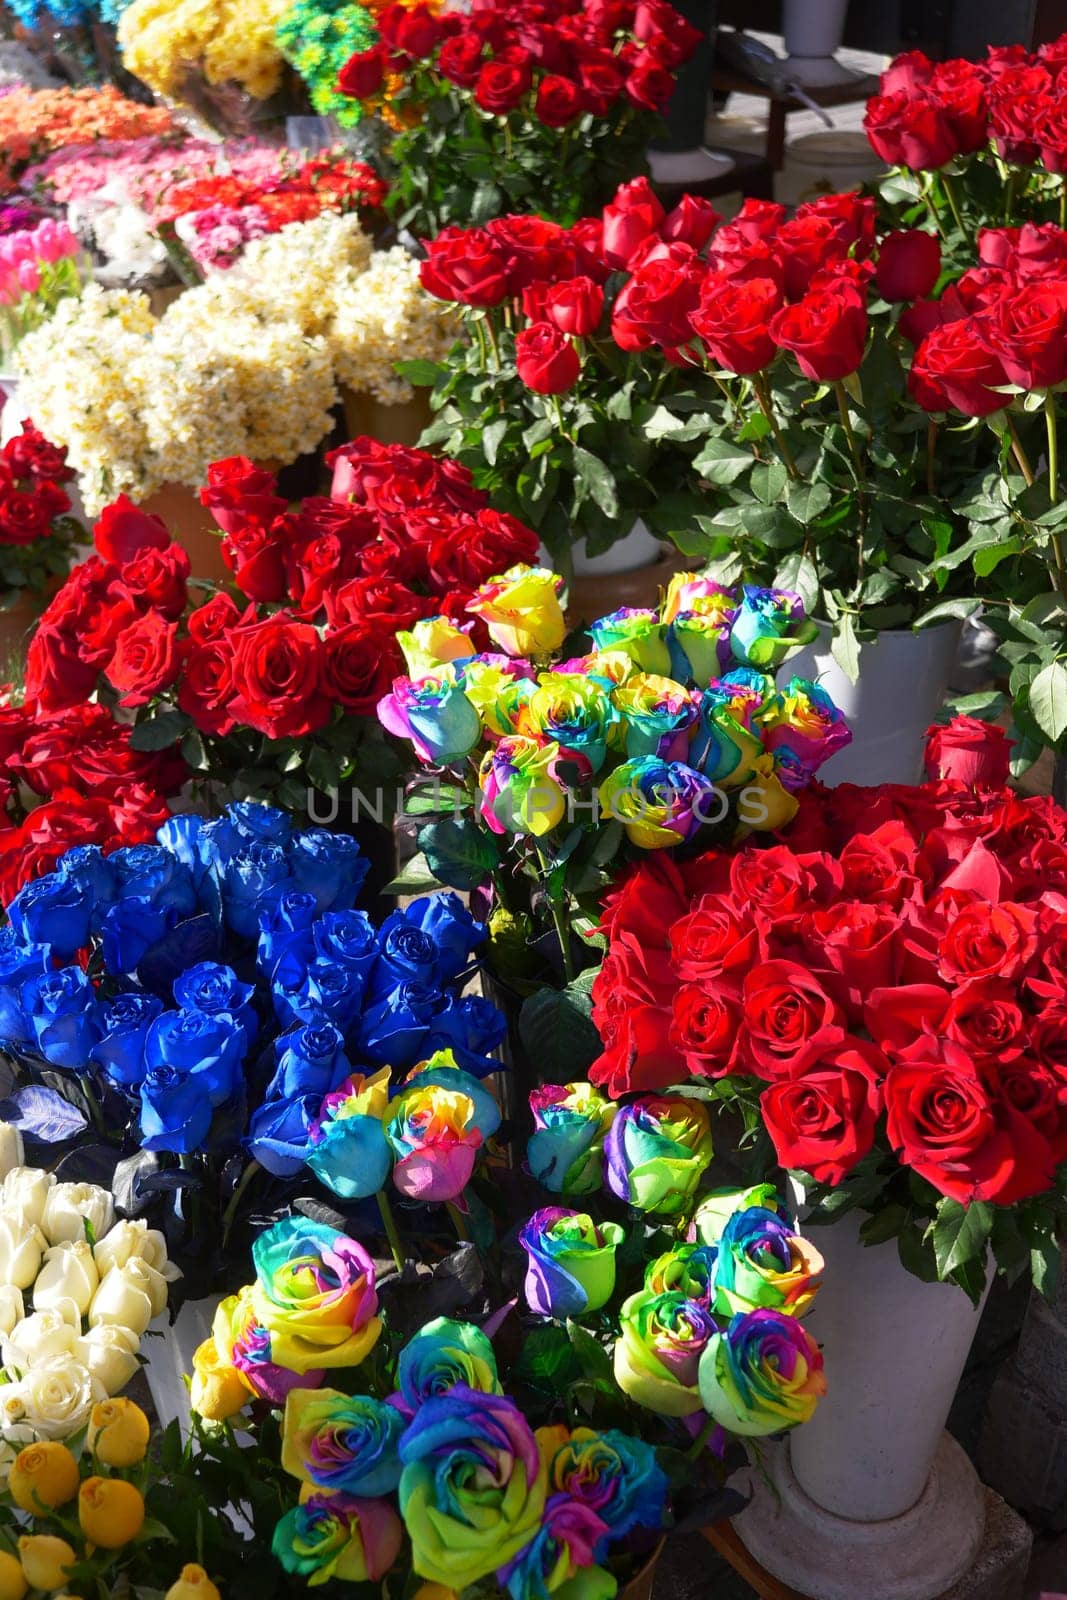 flower shop in istanbul, flower display for selling at street shop , by towfiq007